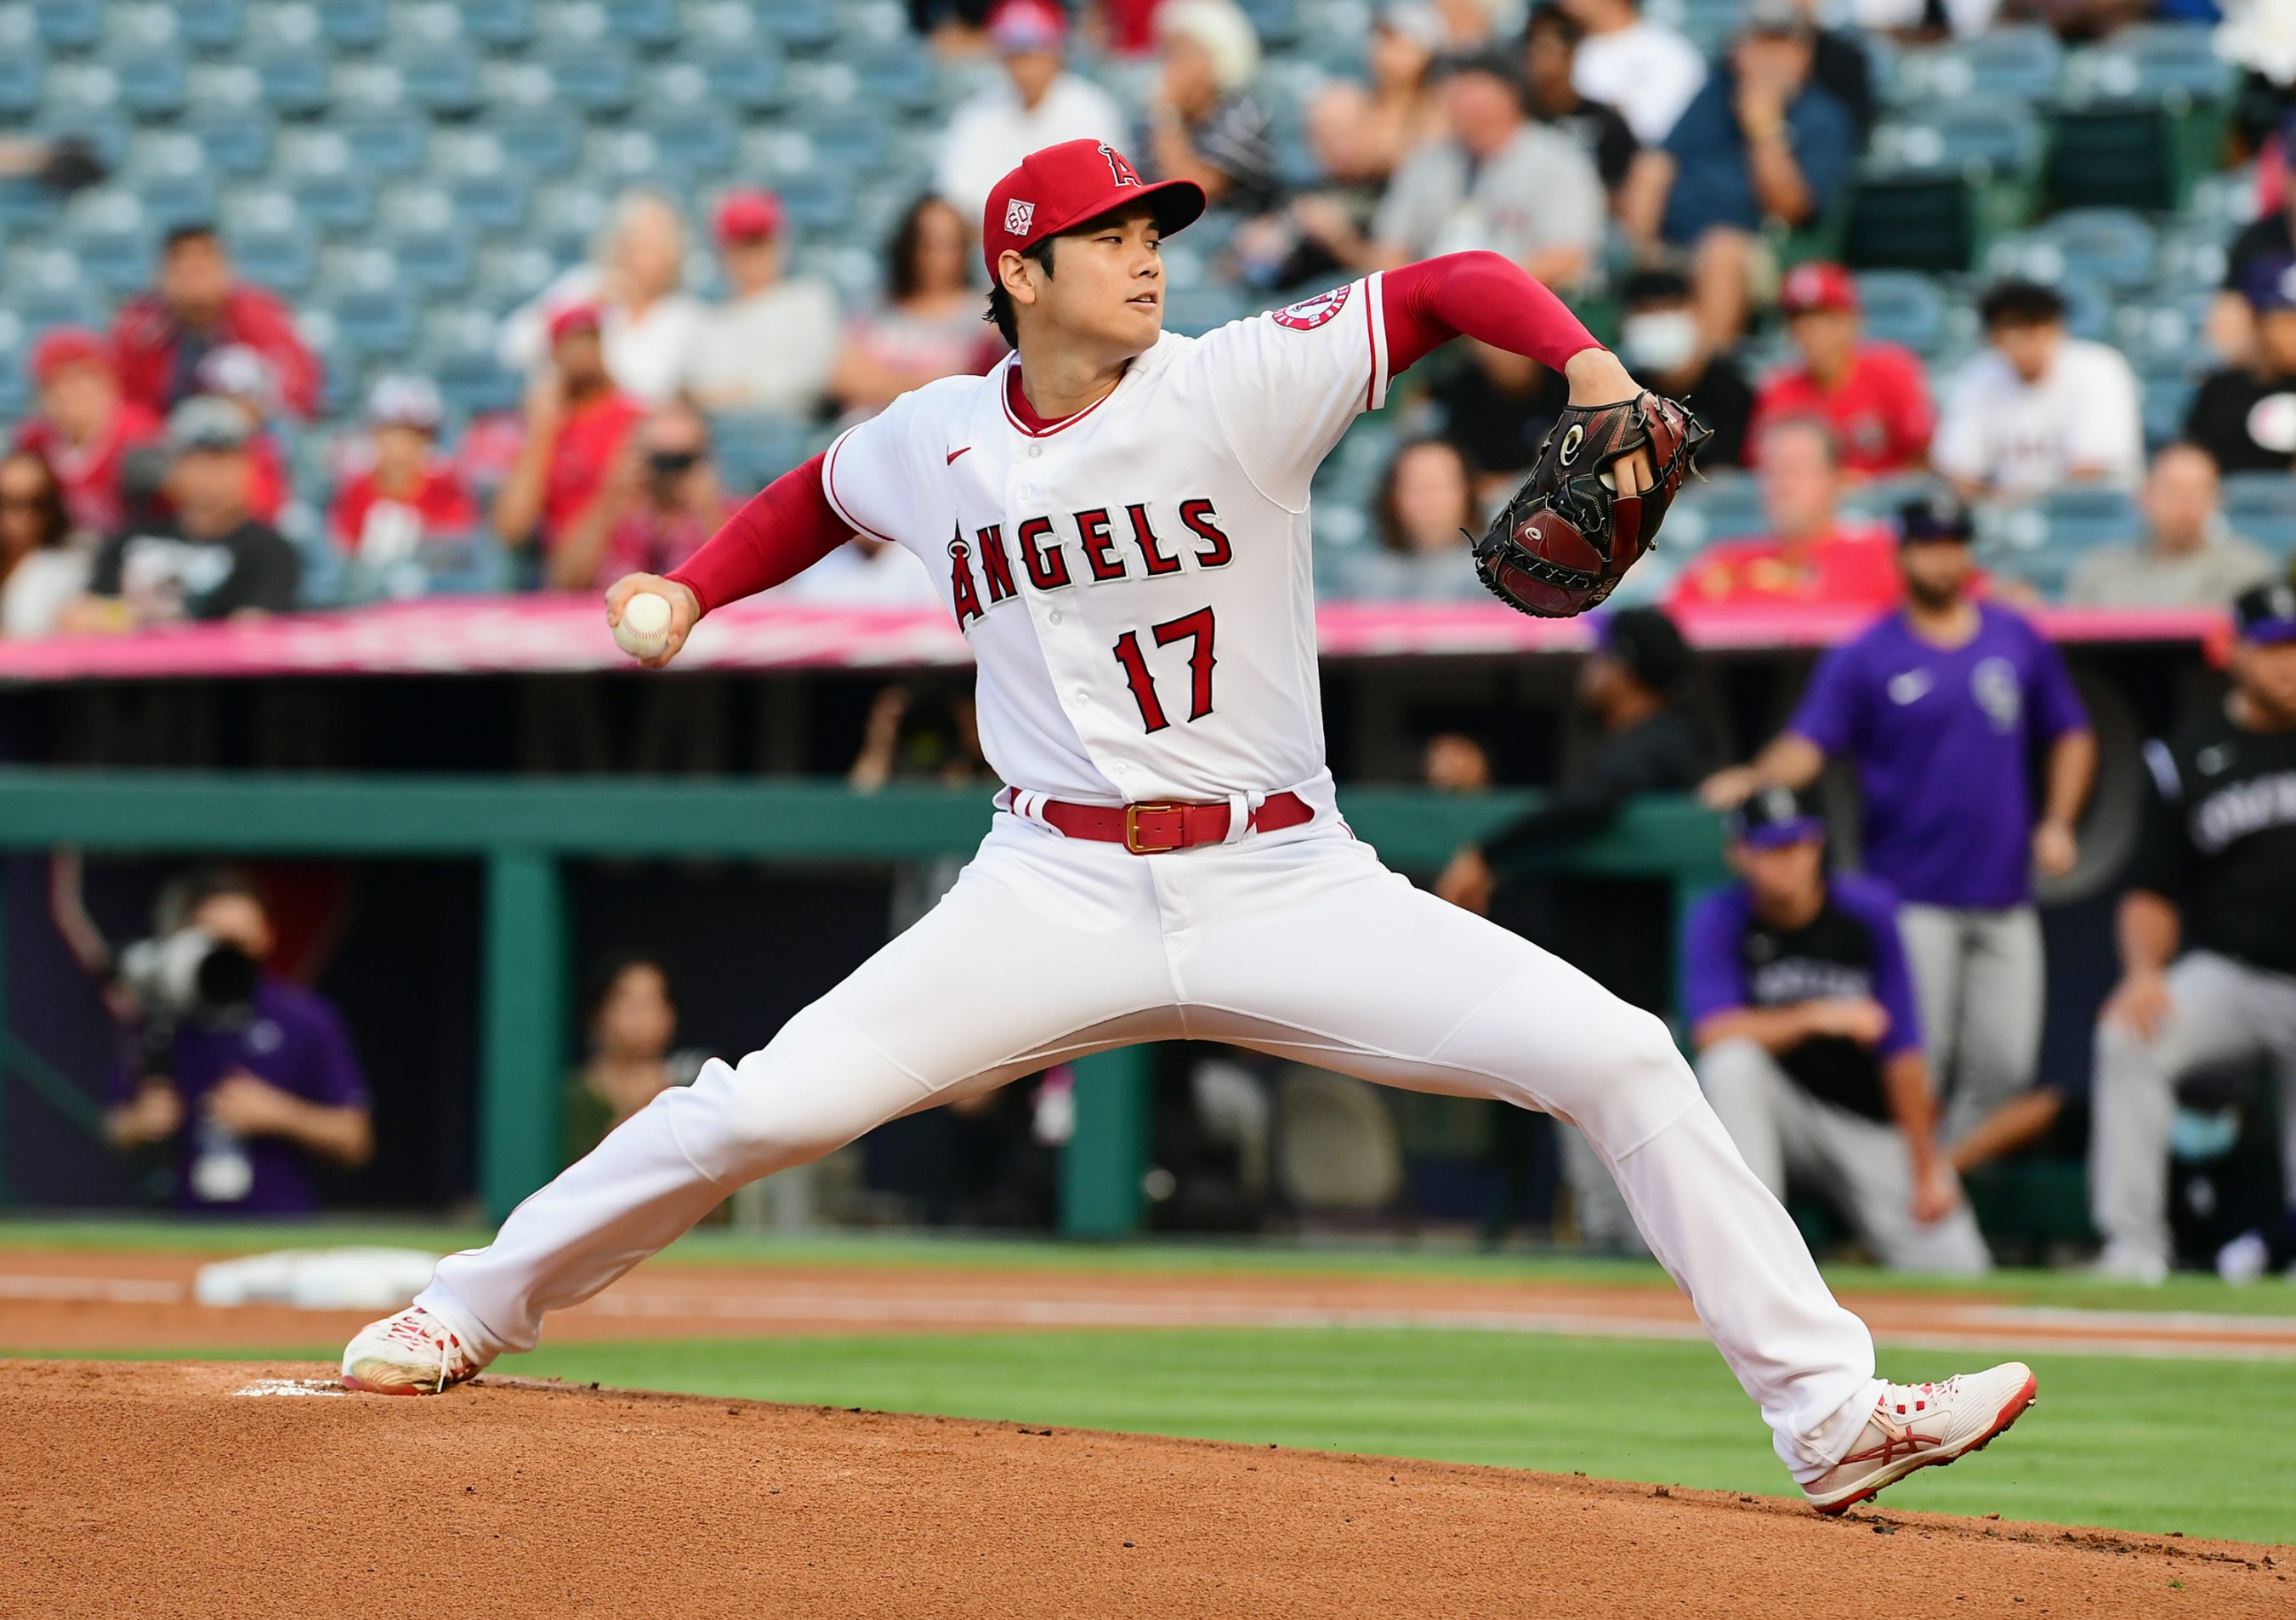 Shohei Ohtani is the story of 2018, and that's good for baseball